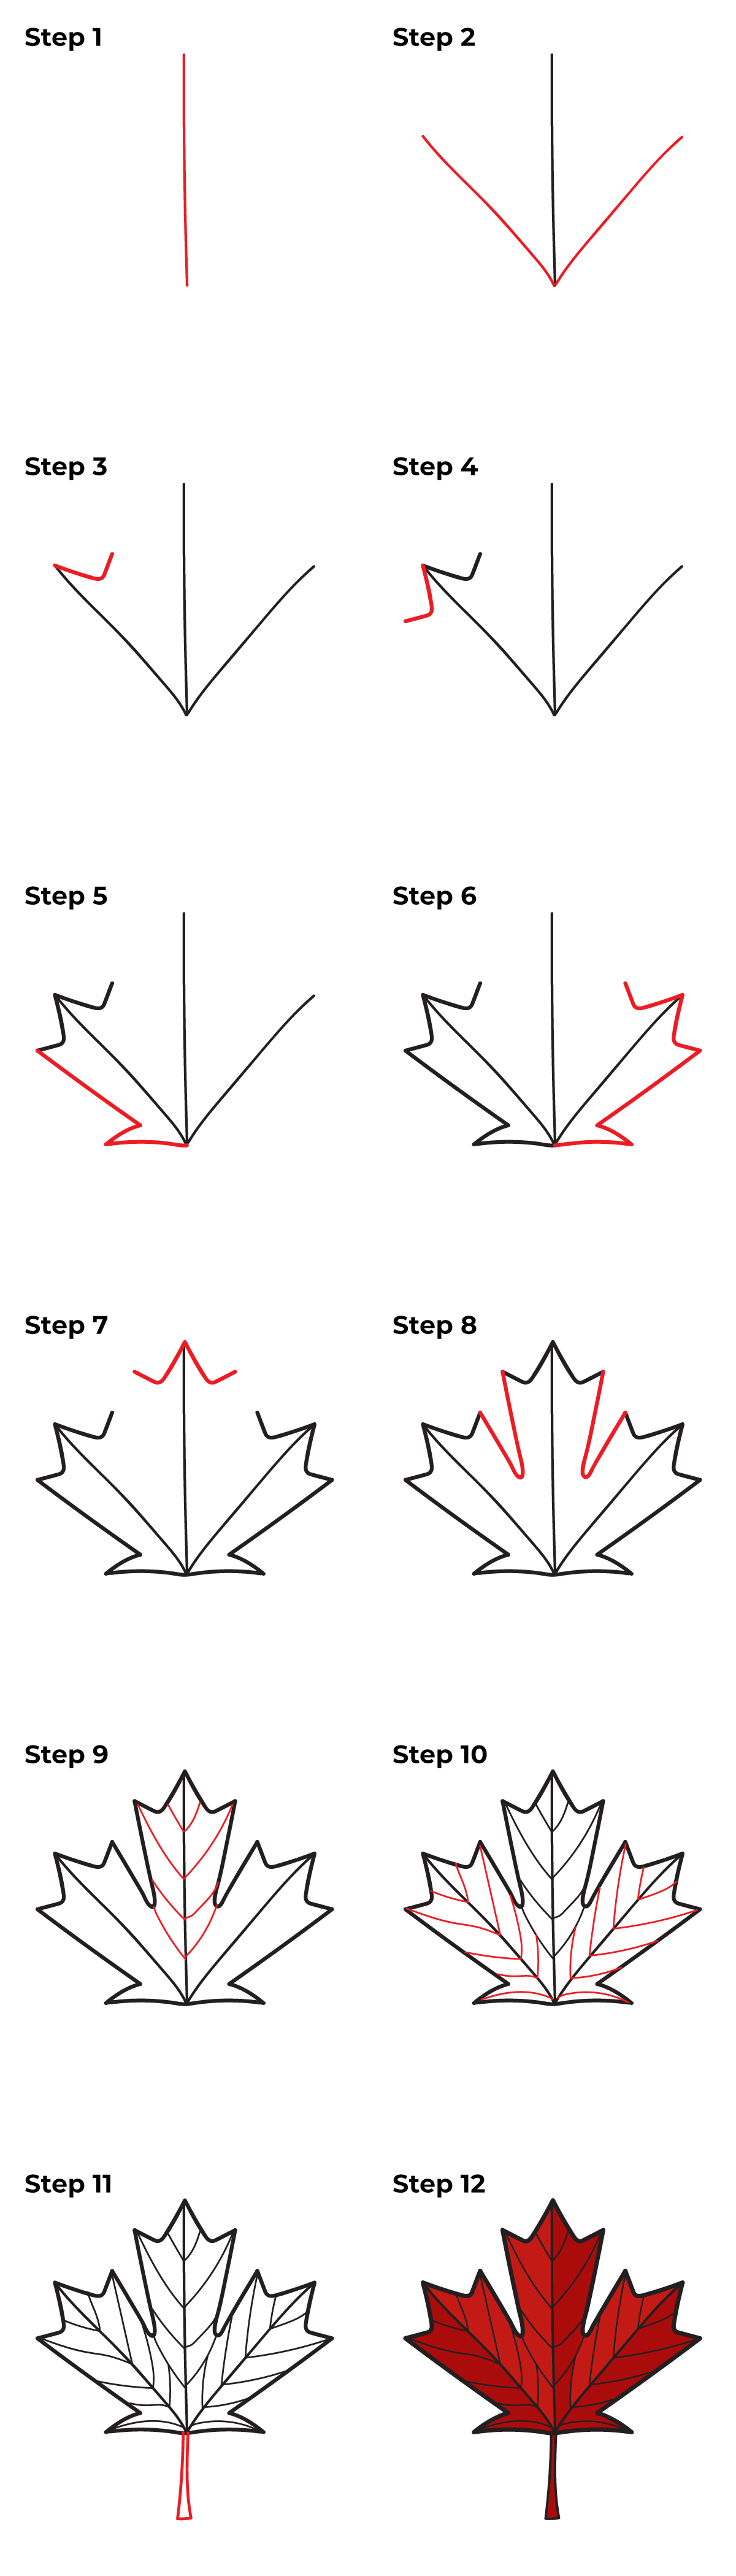 Maple Leaf Drawing - How To Draw A Maple Leaf Step By Step